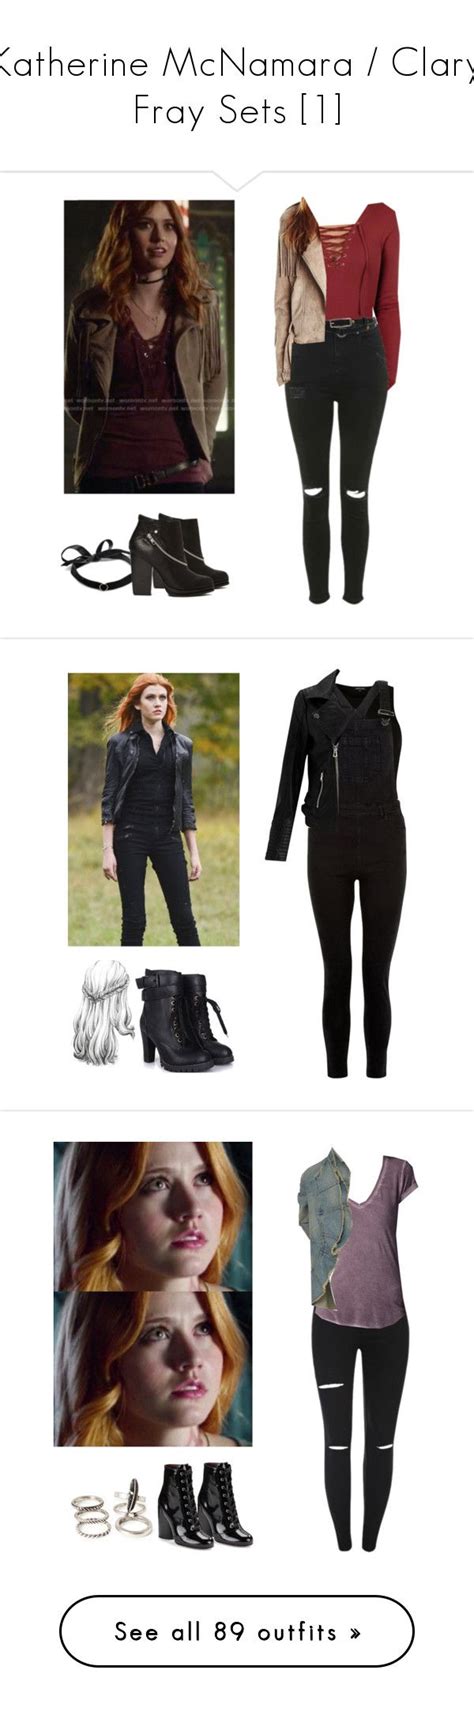 Katherine McNamara Clary Fray Sets 1 By Demiwitch Of Mischief